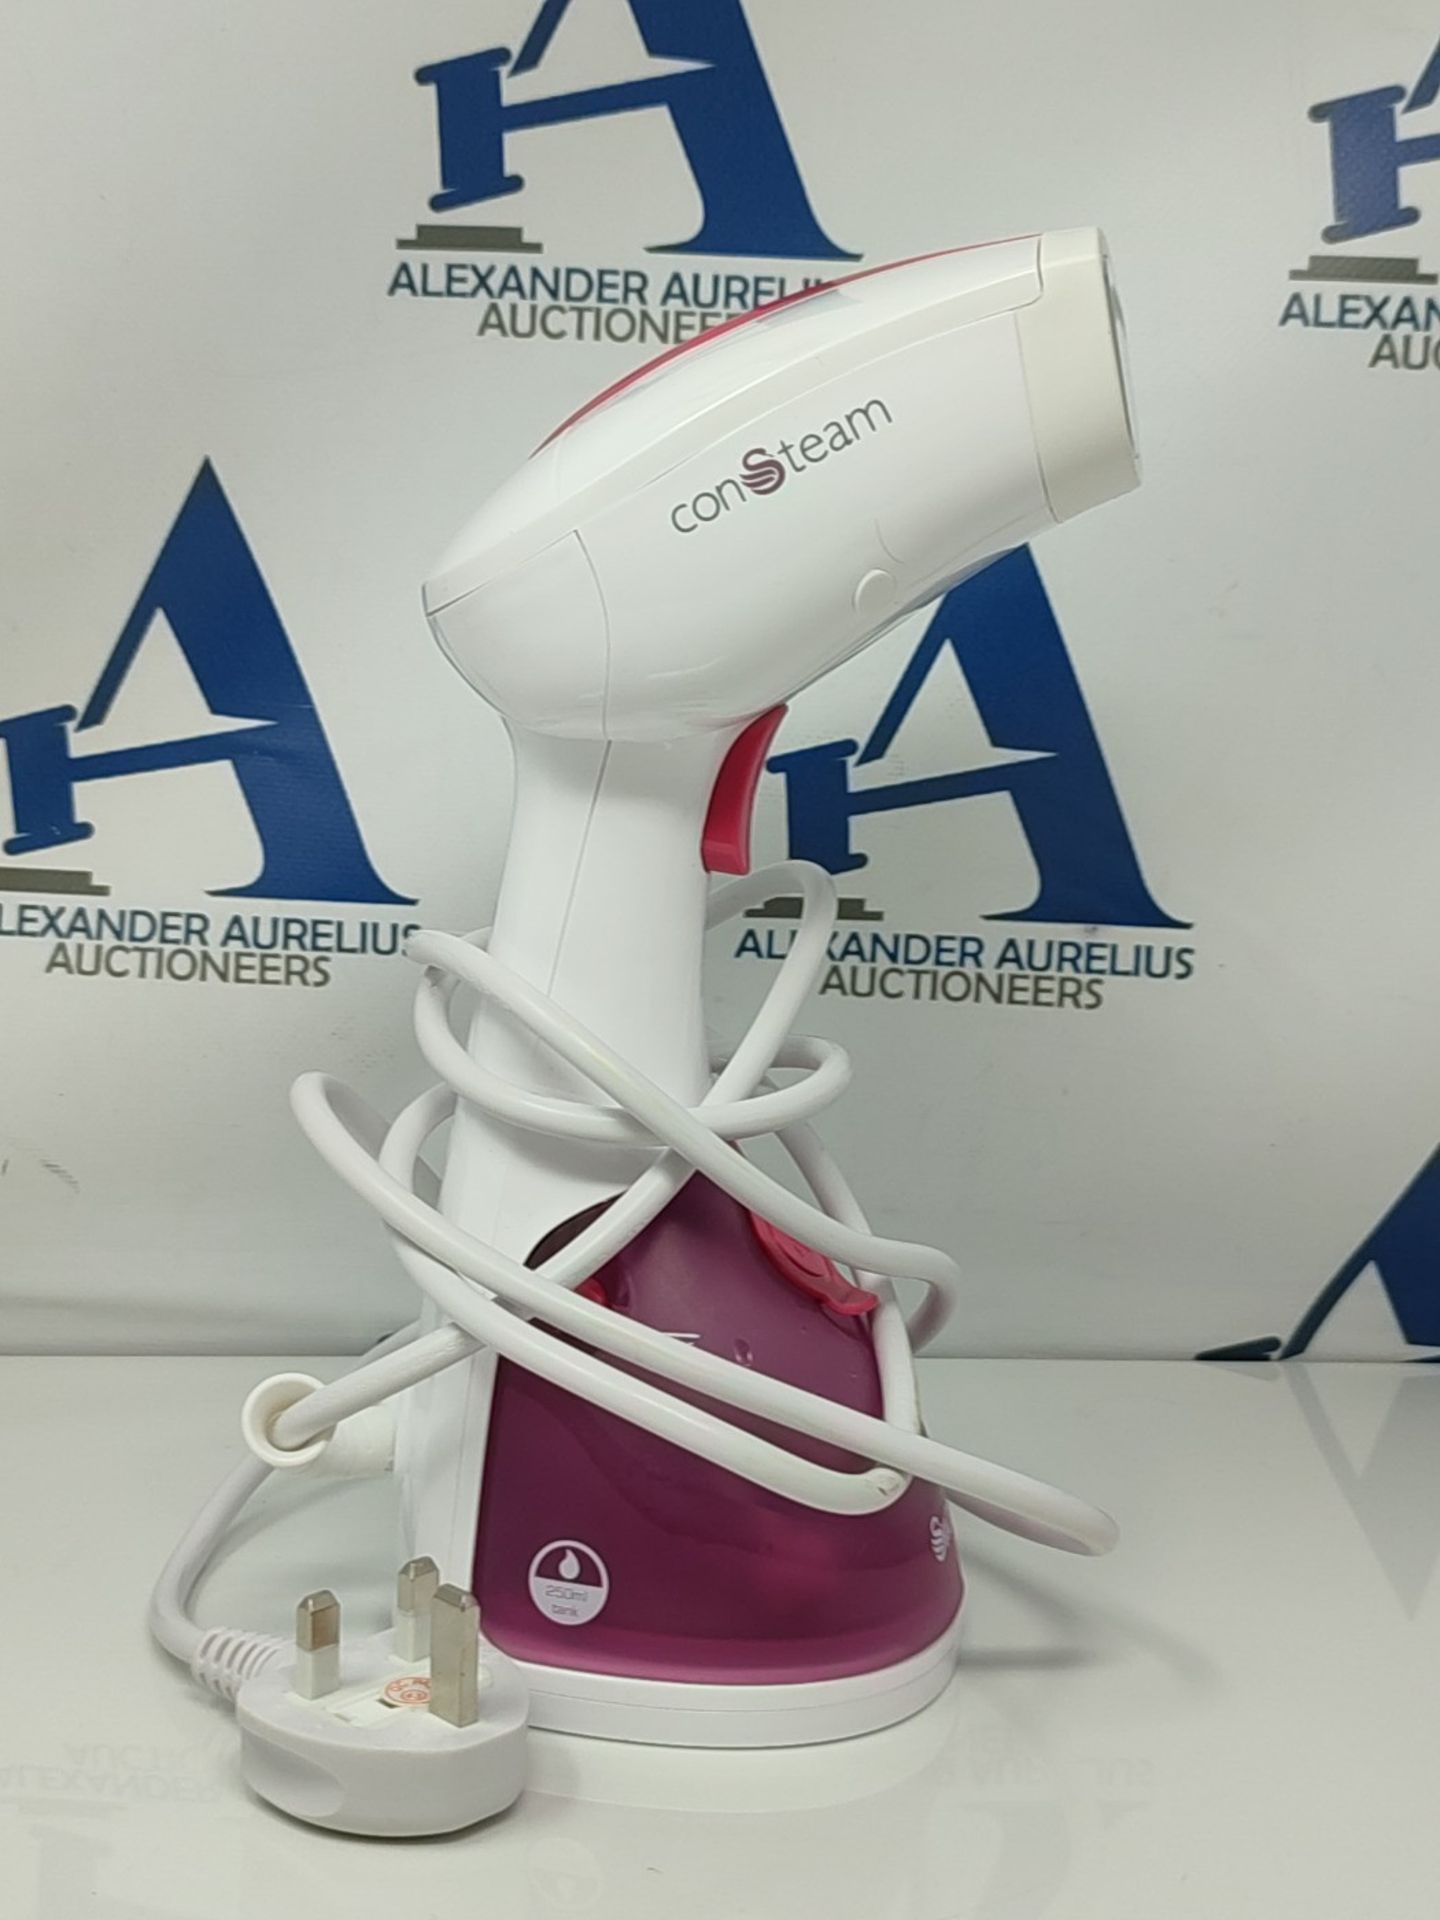 Swan, SI12020N, Handheld Garment Steamer, Lightweight and Compact, 1100W, Iron, Pink - Image 3 of 3